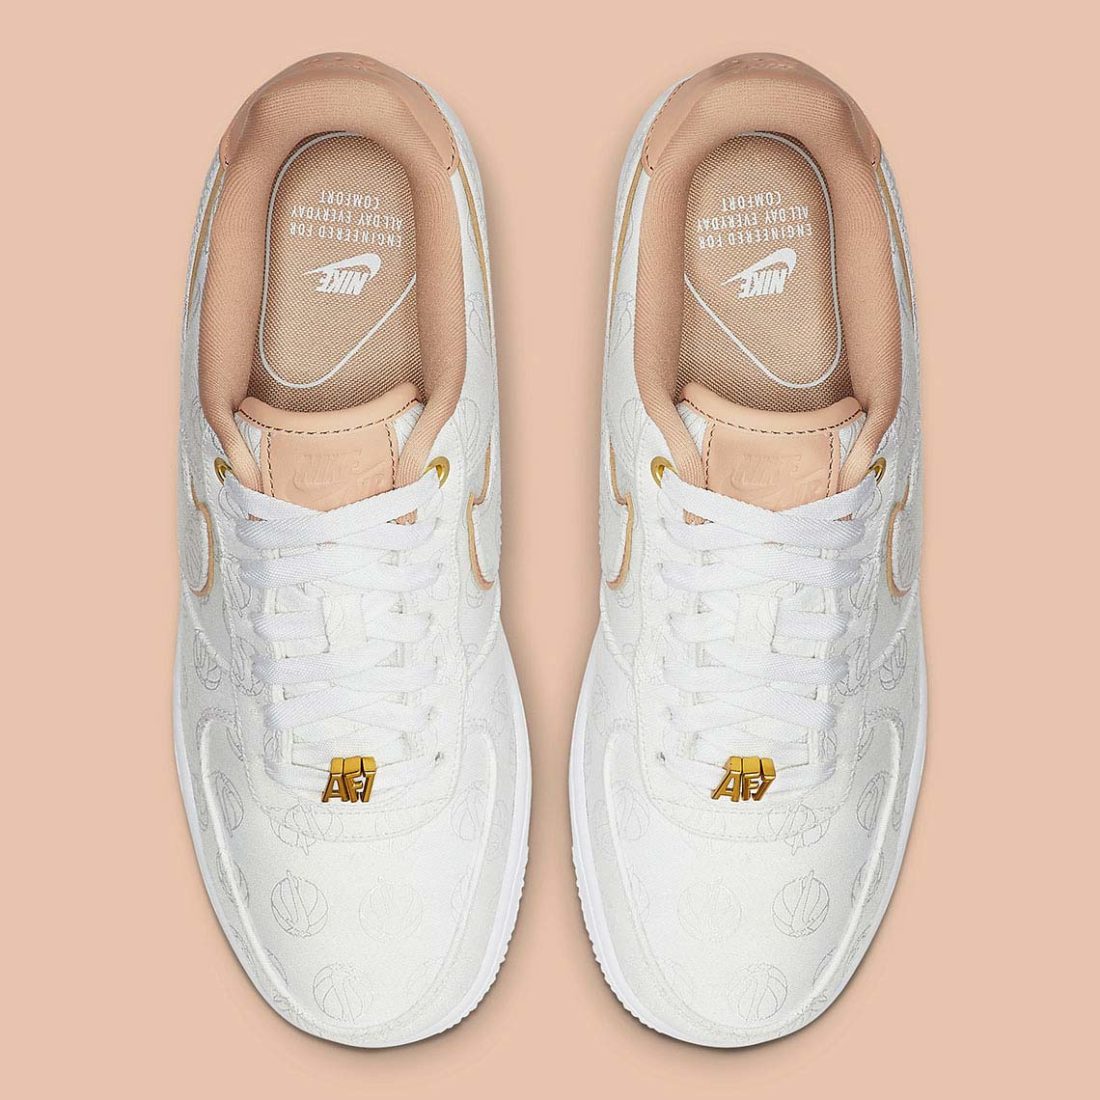 air force 1 07 low lux